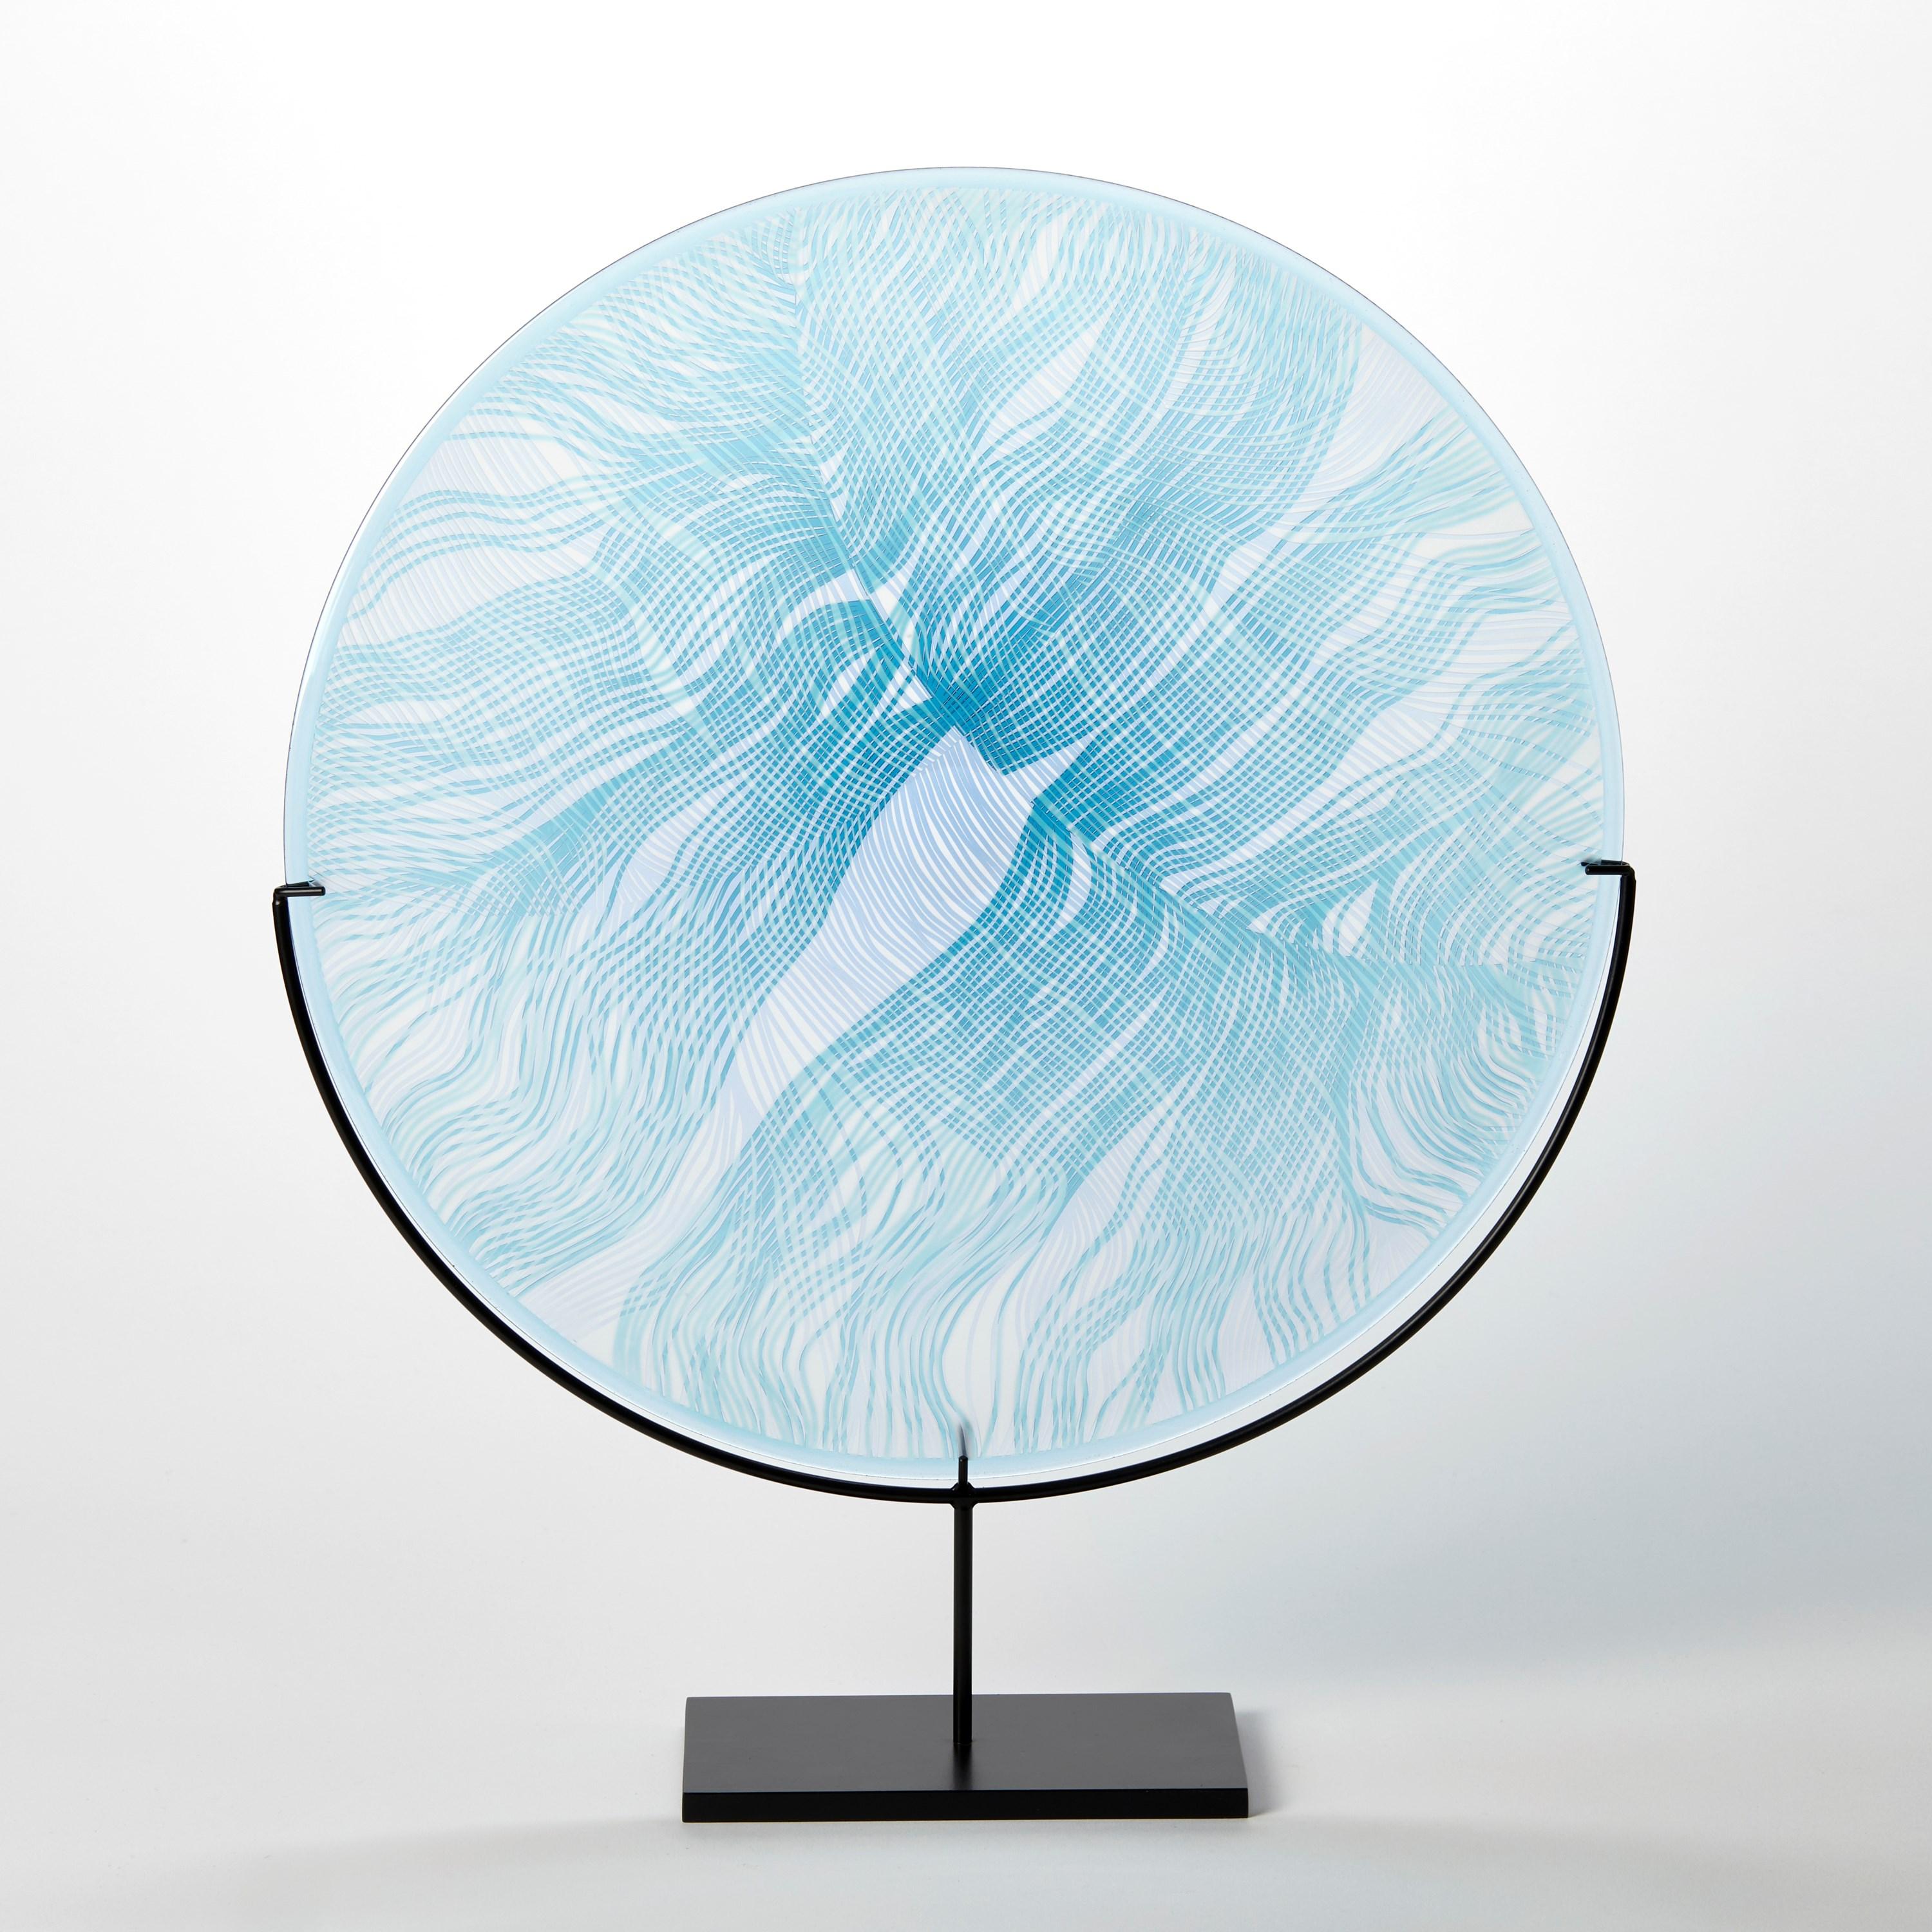 'Solar Storm Sky Blue over Ice Blue II' is a unique handblown and cut glass artwork by the British artist, Kate Jones of Gillies Jones.

In the artist's own words:

“This new body of work references both the evident structure of the landscape and